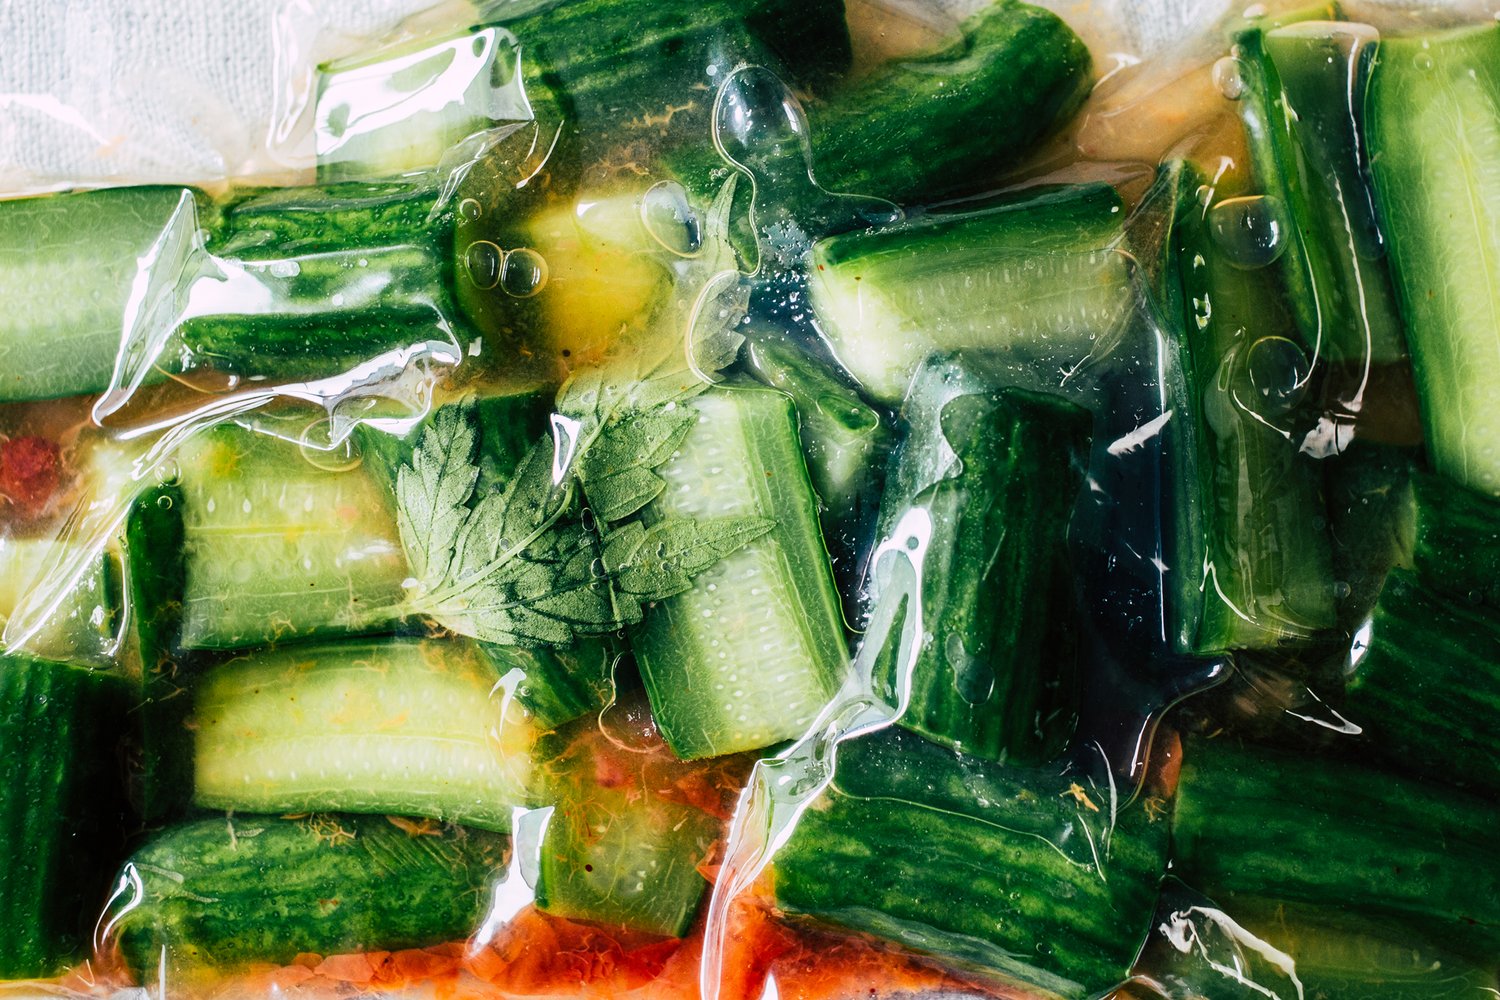 Delicious Cannabis-Infused Quick Pickles Recipe